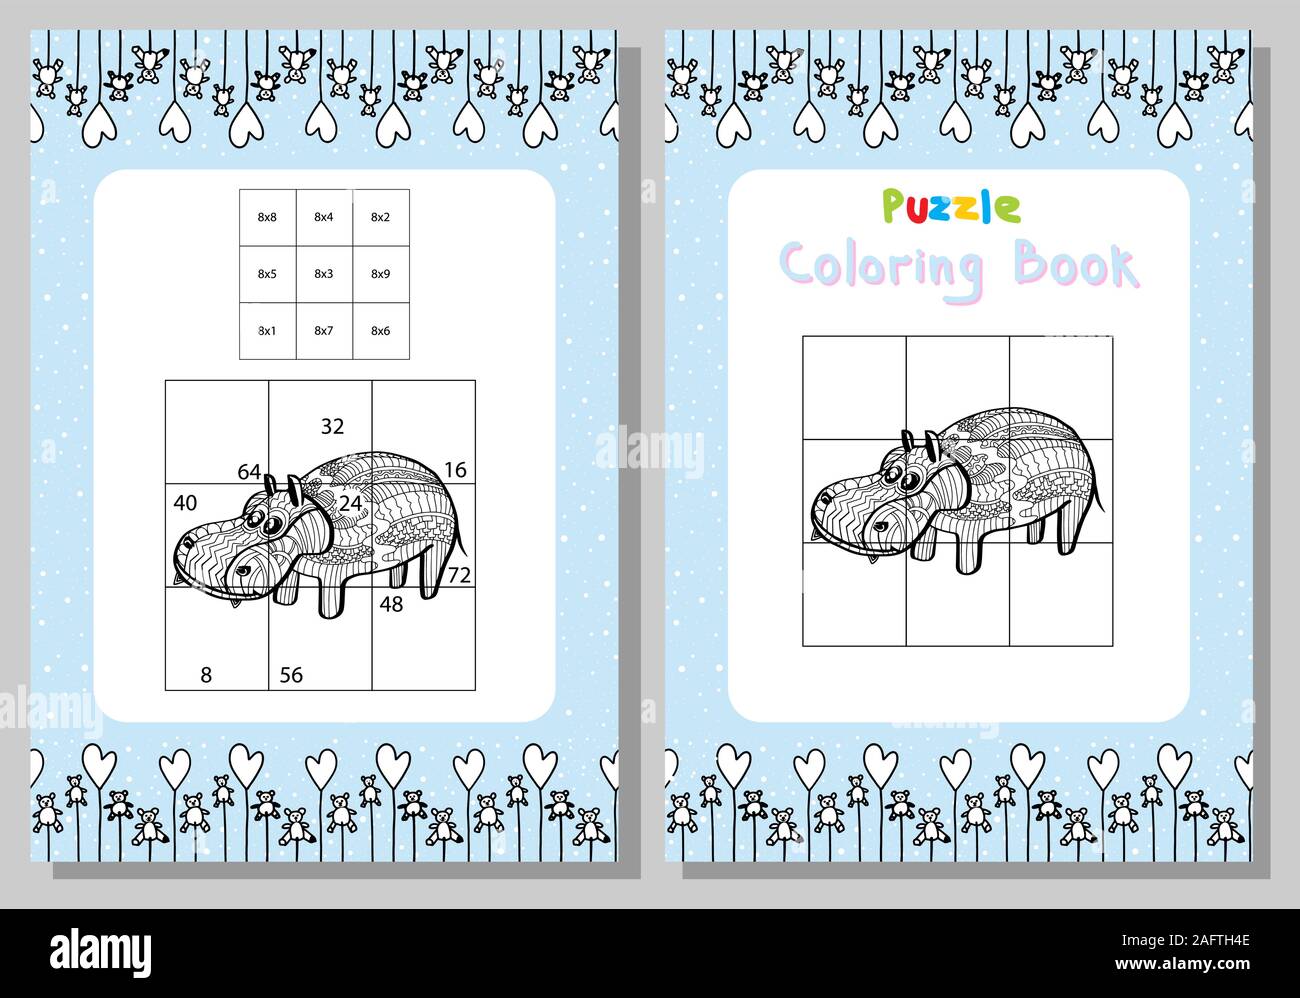 Multiplication table. Puzzle coloring book hippo. Childish style. Educational games. Game.Vector Stock Vector